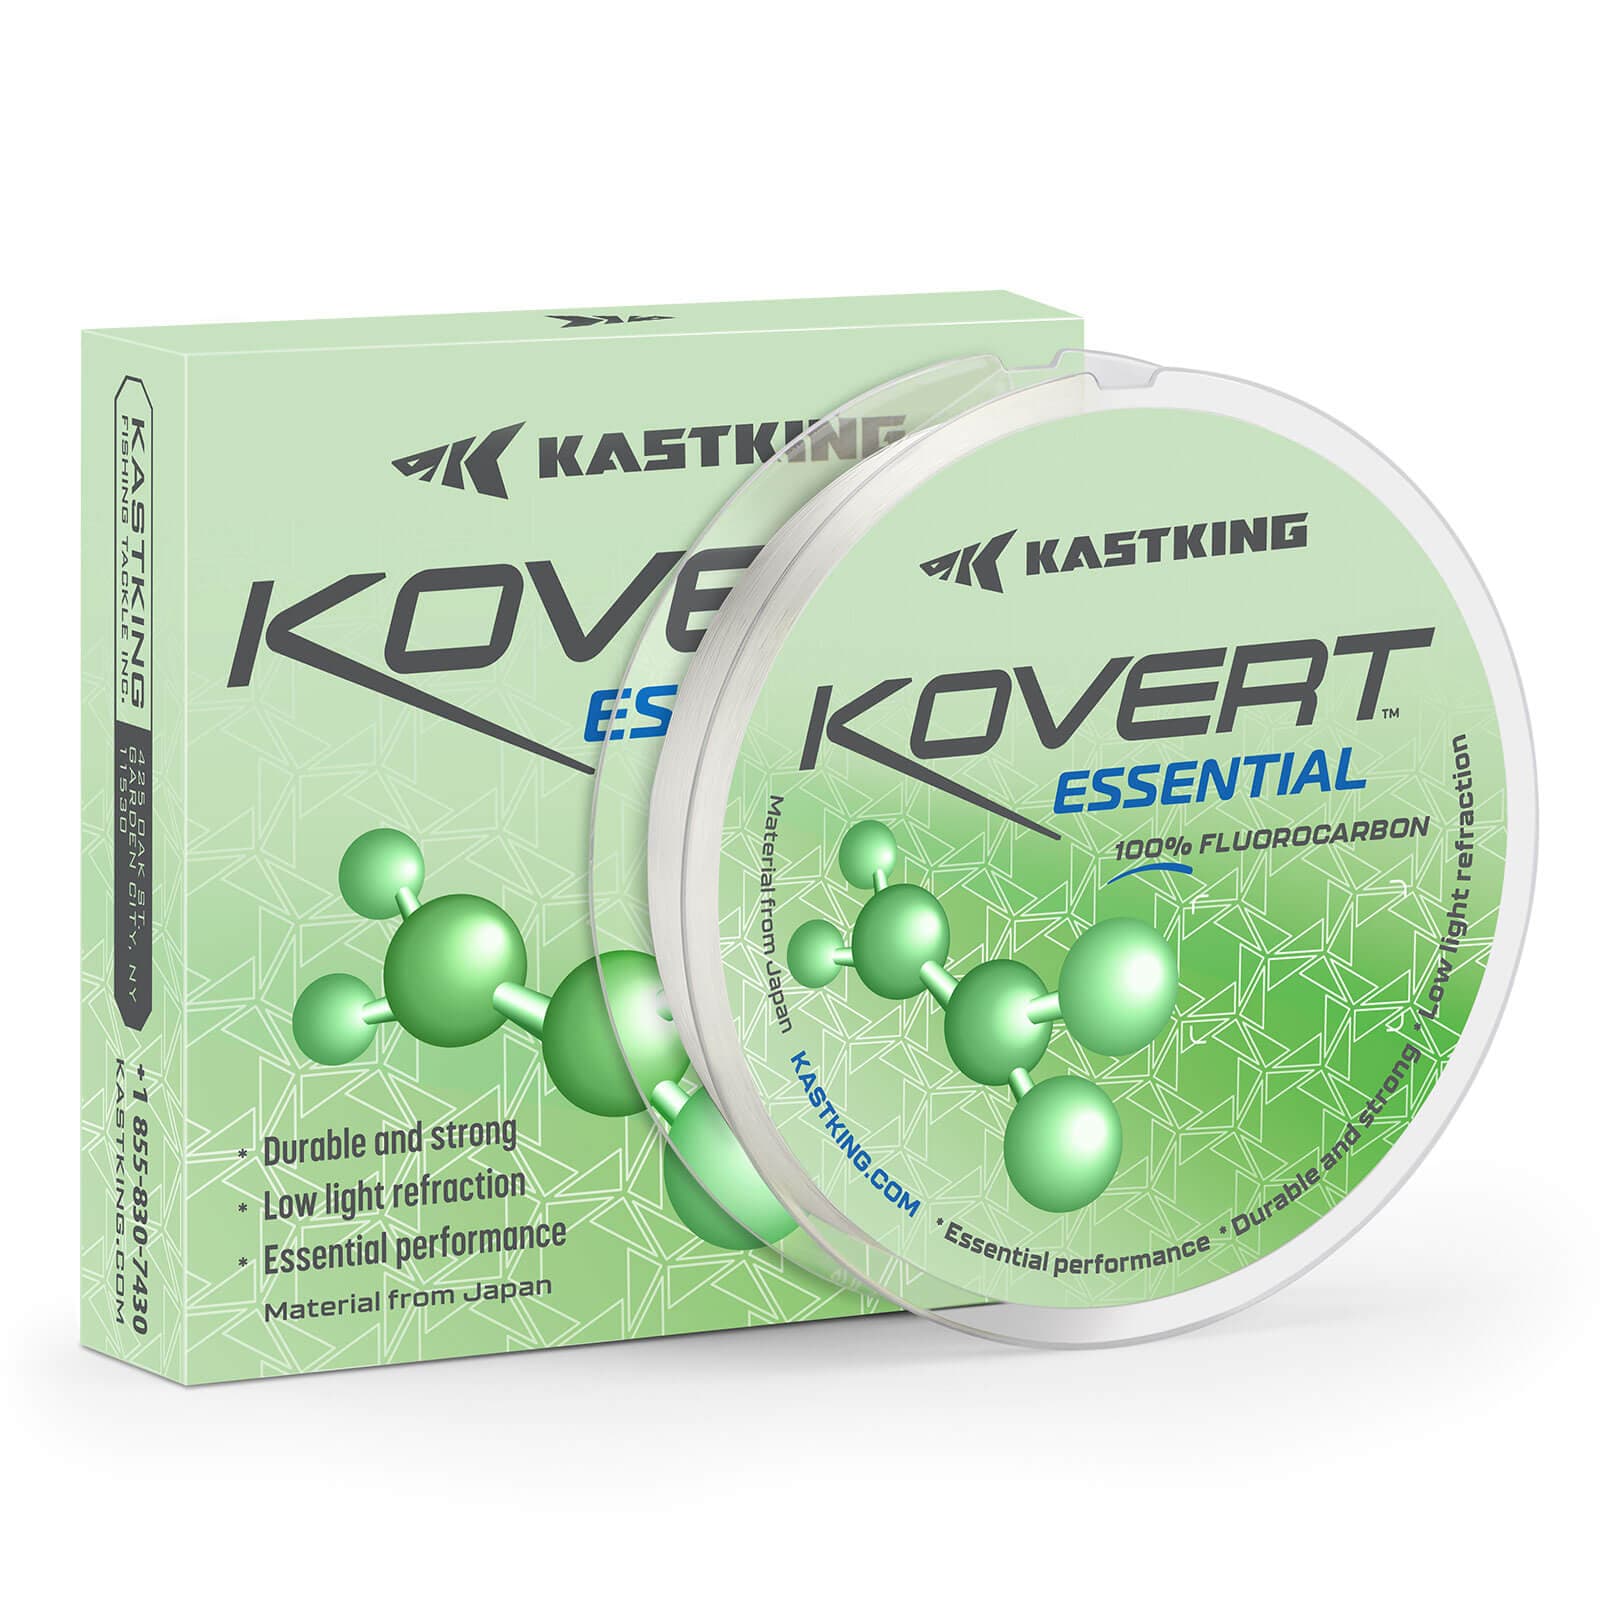 KastKing Kovert Classic 100% fluorocarbon Fishing line, Line or Leader  Material, High Clarity, Low Visibility, Highly Abrasion Resistant, Fast